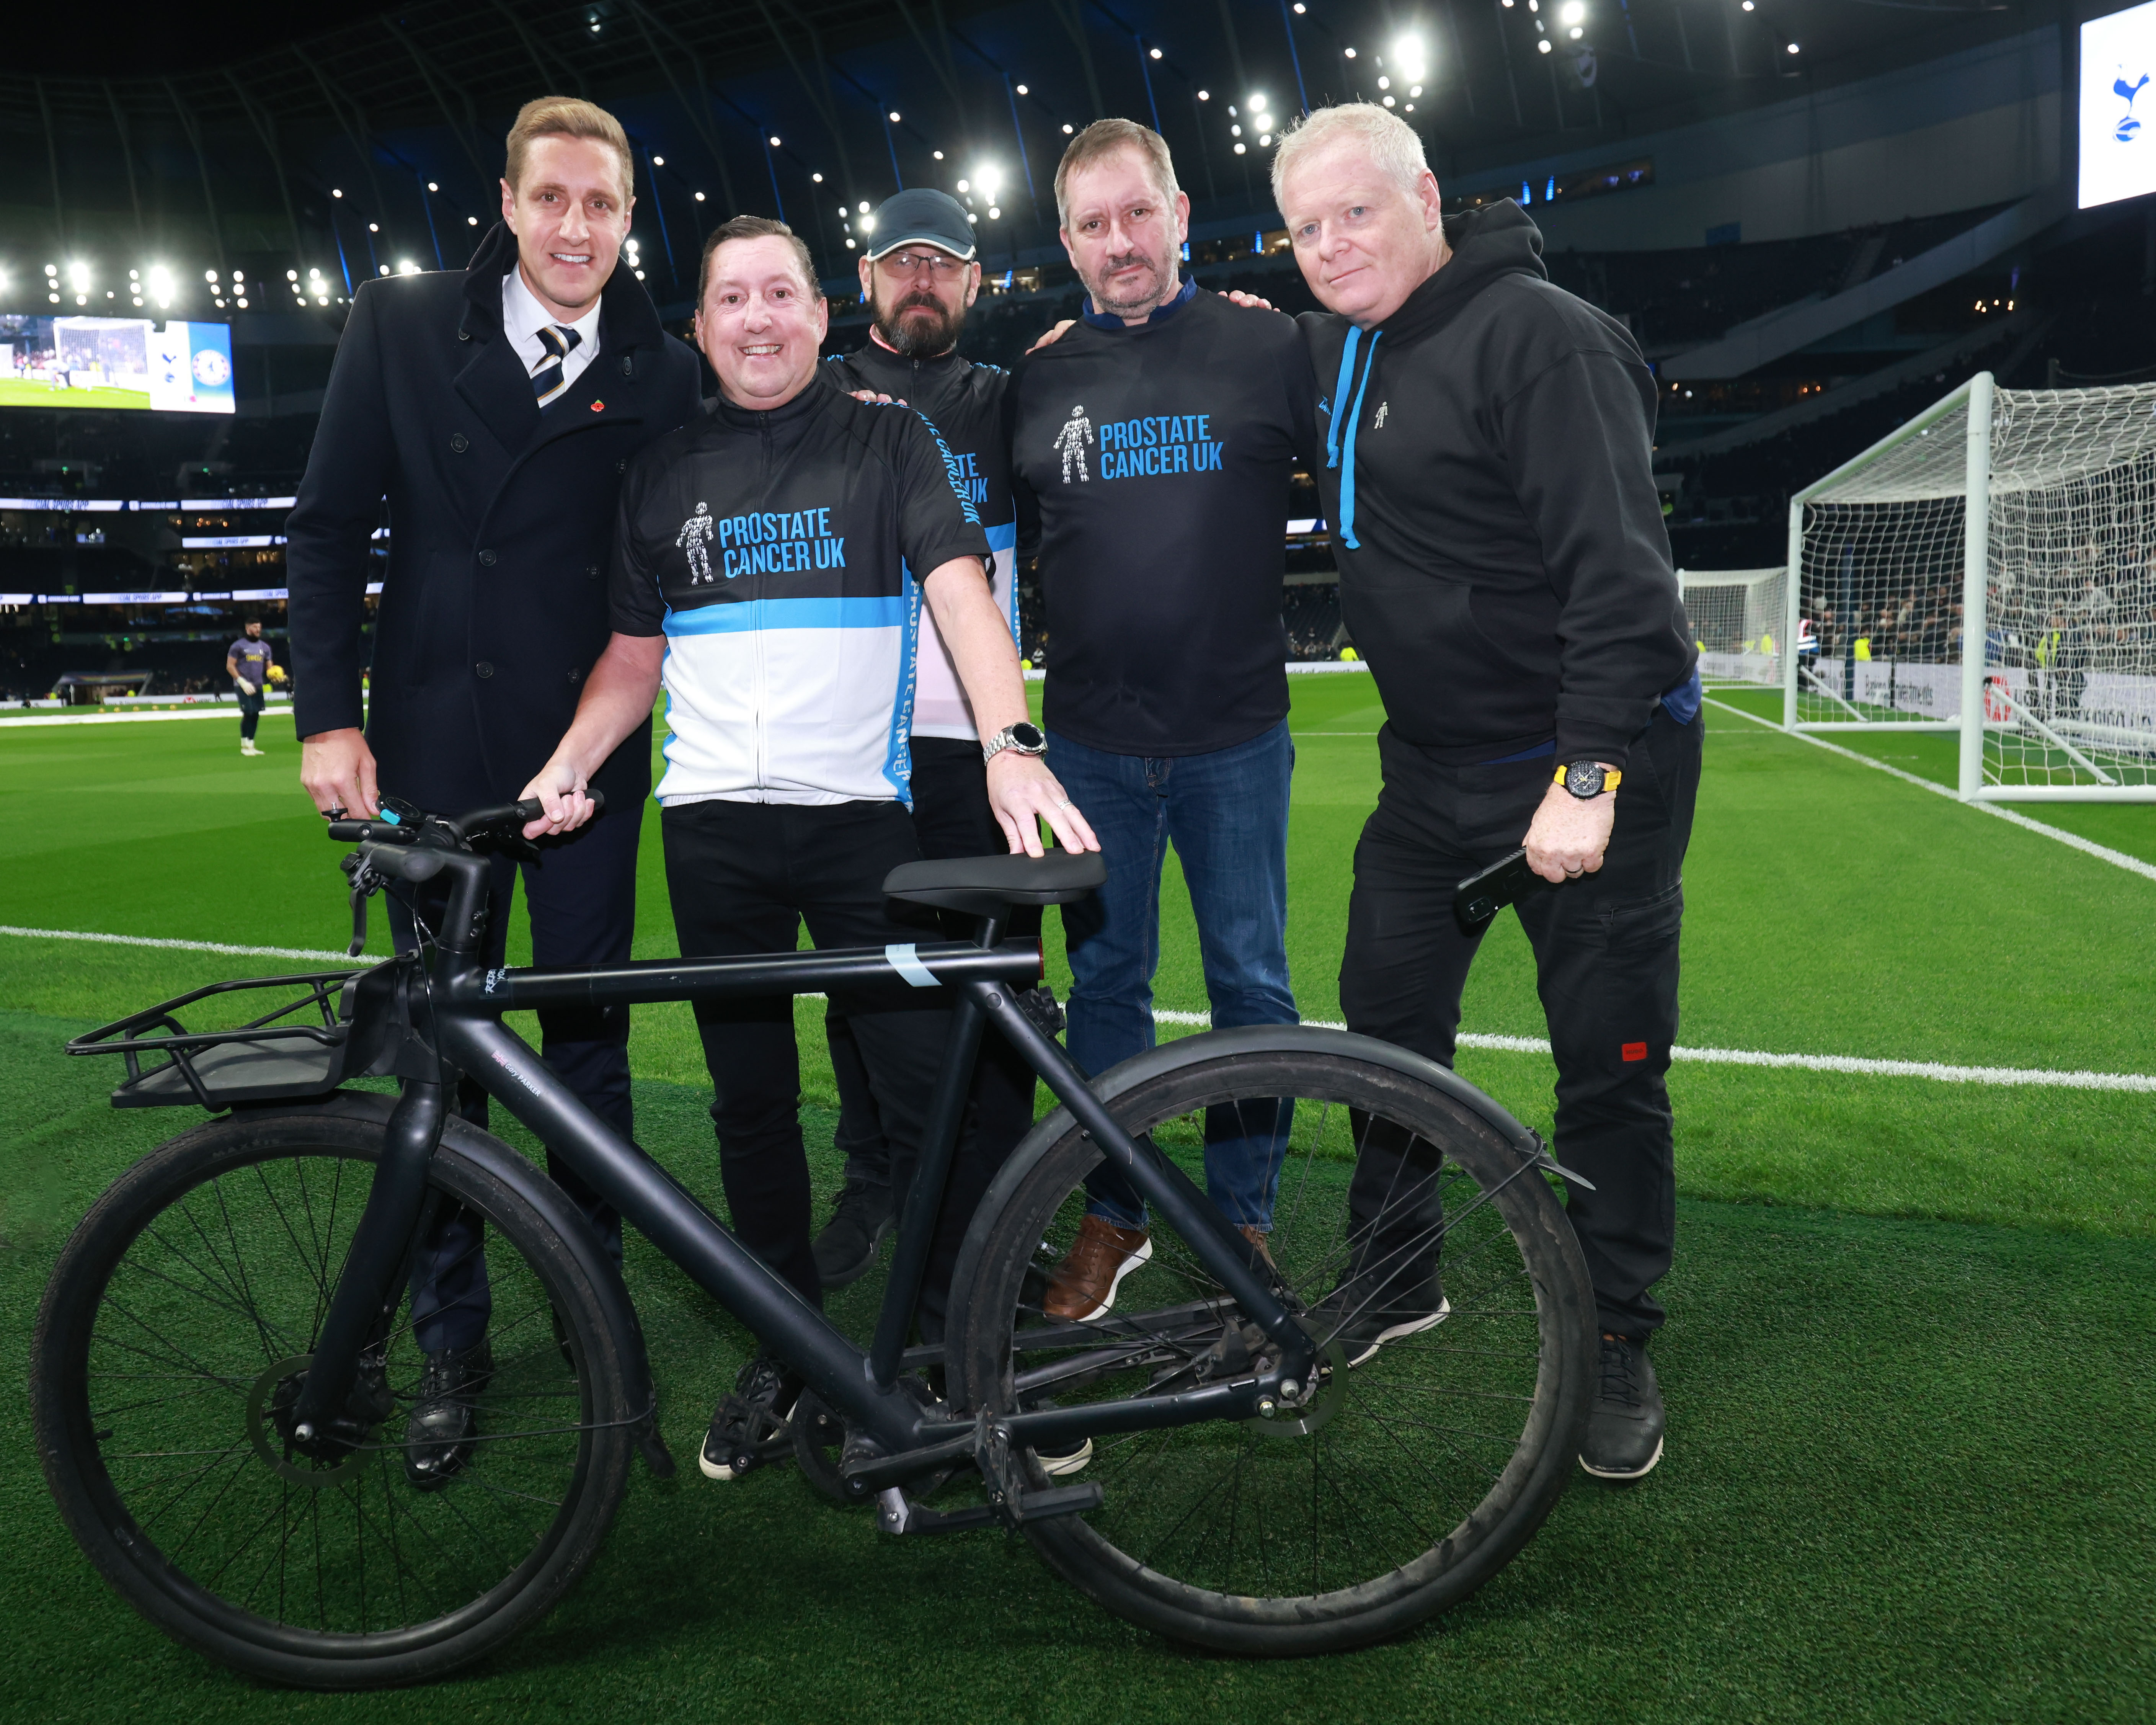 Former Tottenham player Michael Dawson (left) with Prostate Cancer UK guests